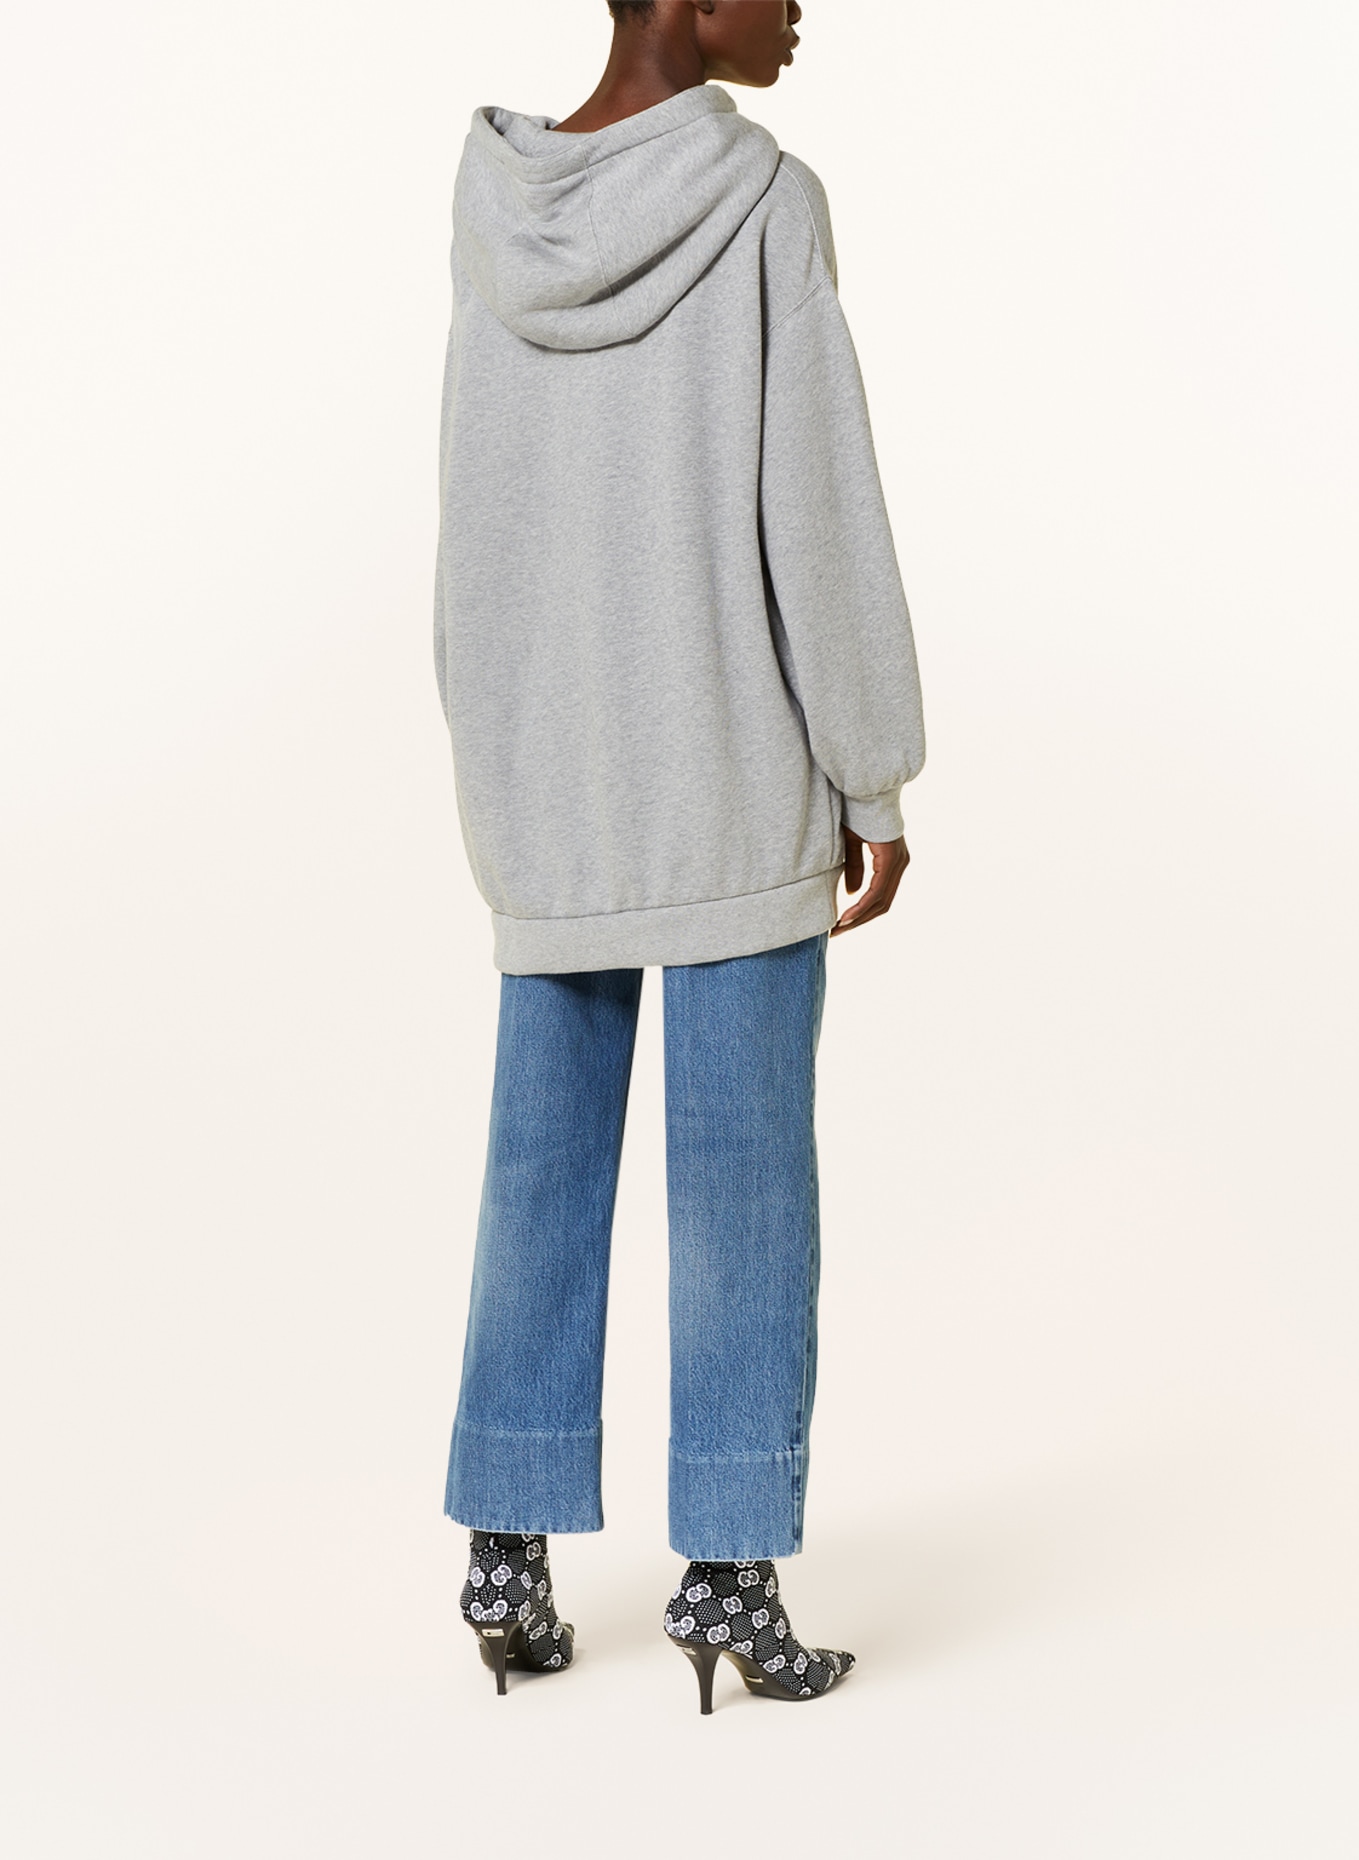 GUCCI Oversized hoodie, Color: 1037 GREY/MIX (Image 3)